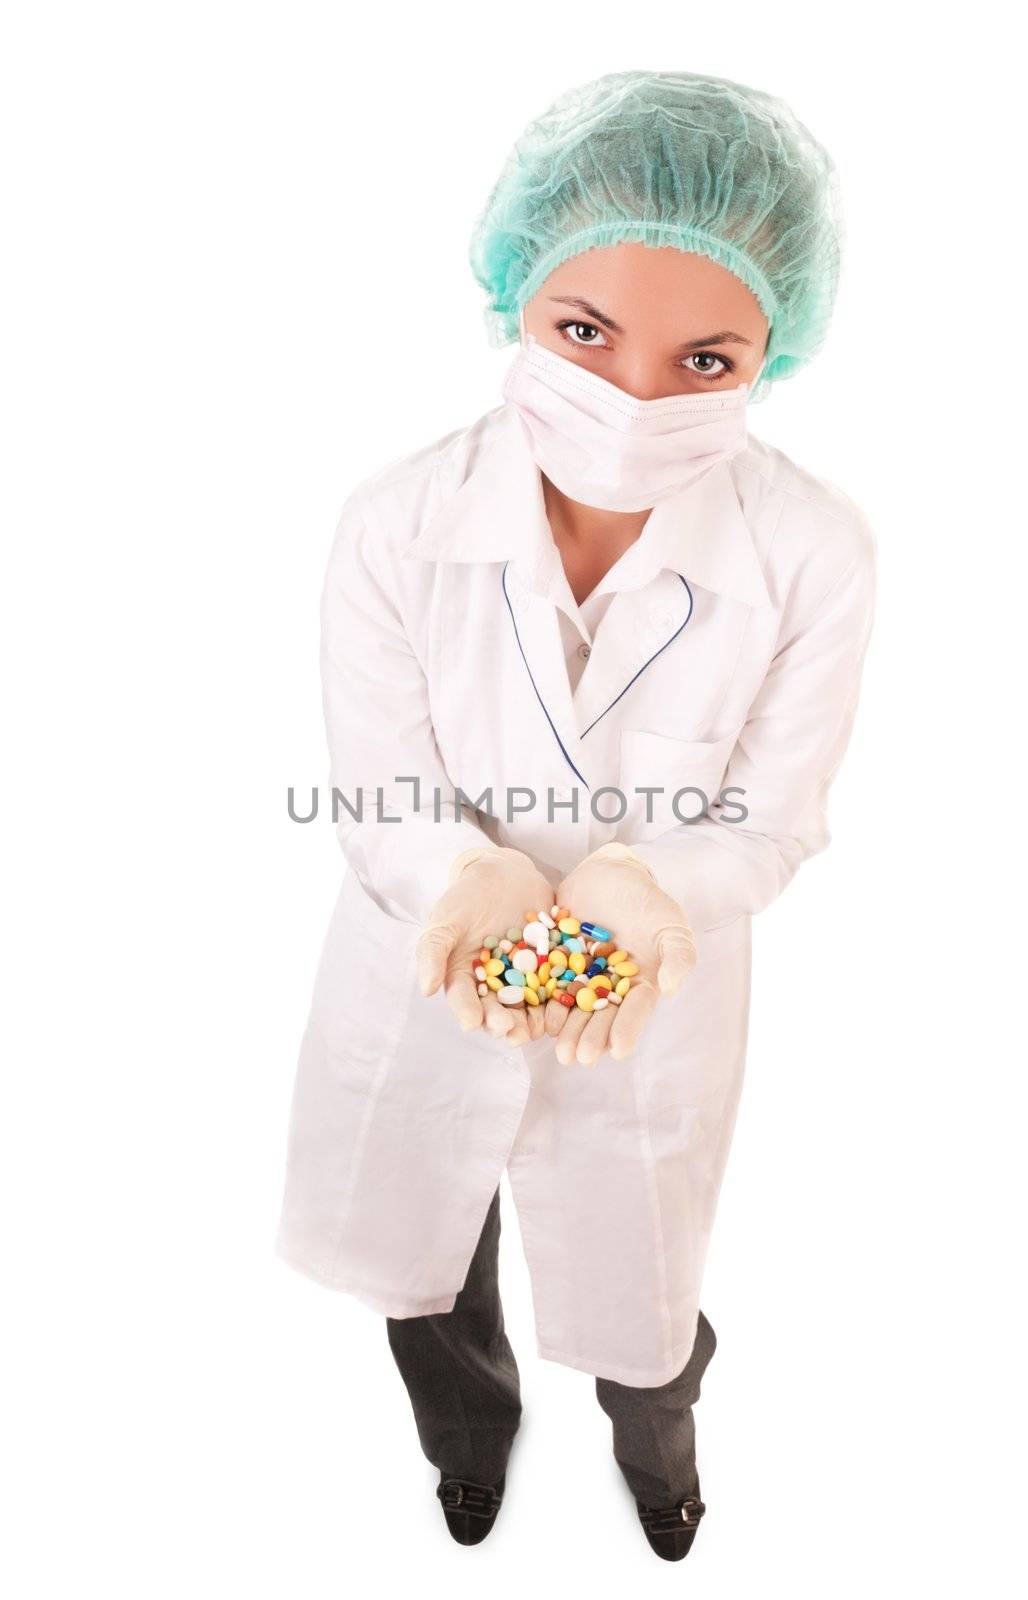 Serious doctor with pills in hands isolated on white background